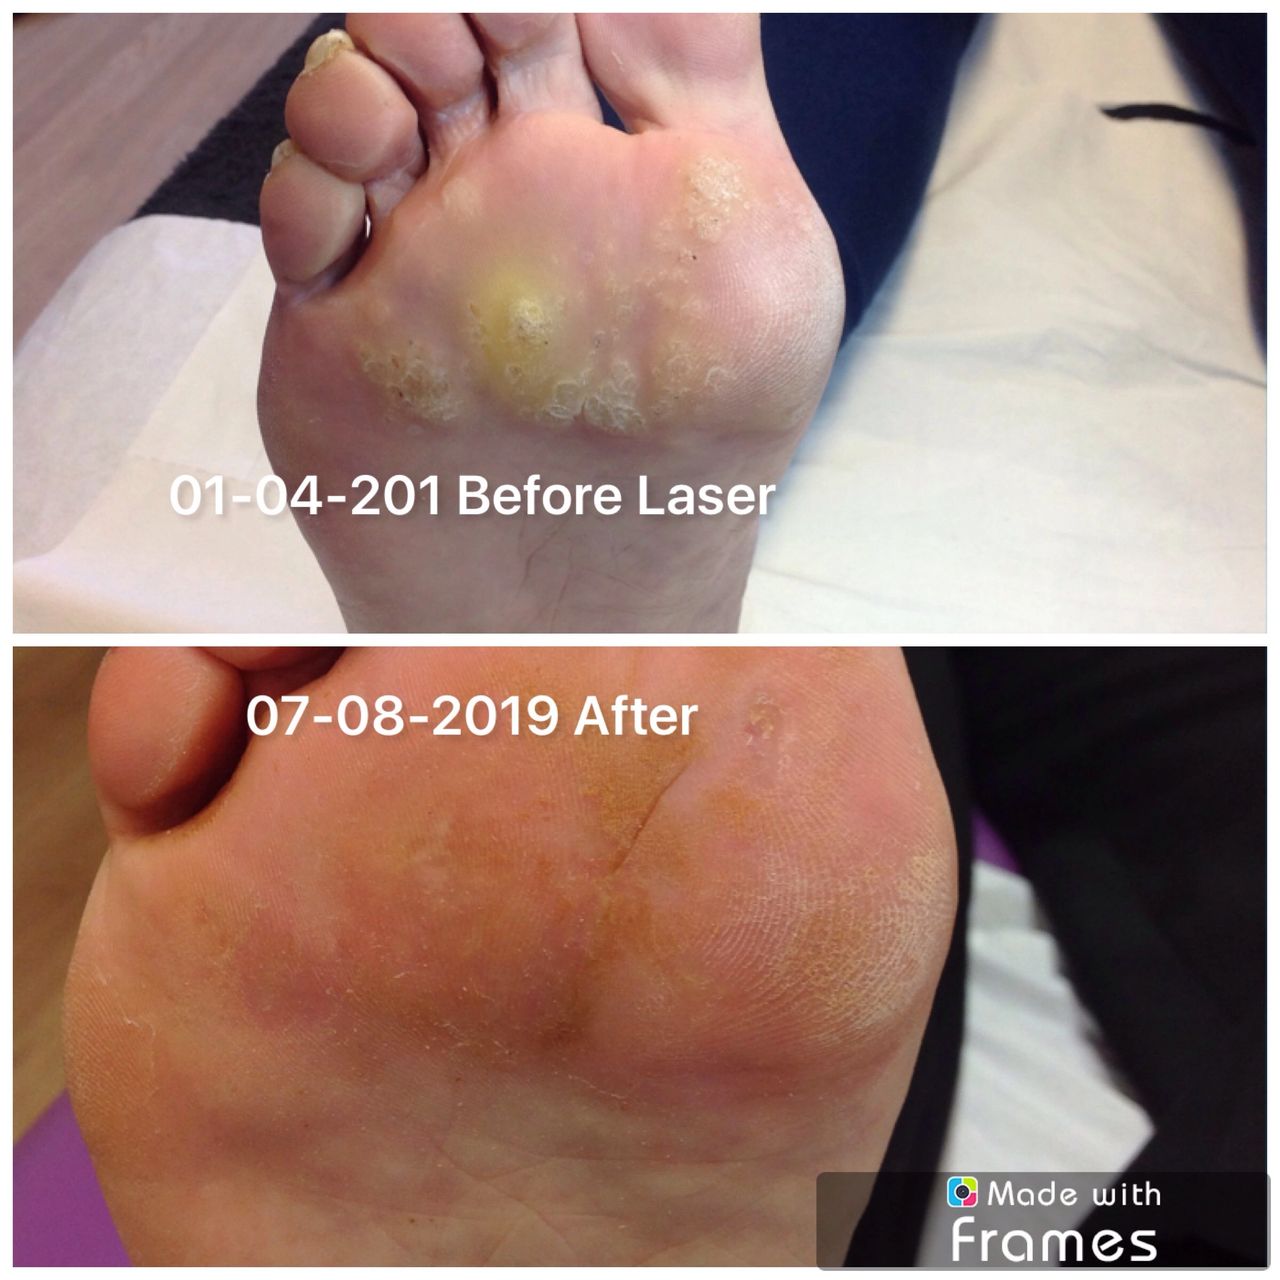 Laser Verruca Treatment Success for Chronic Infection